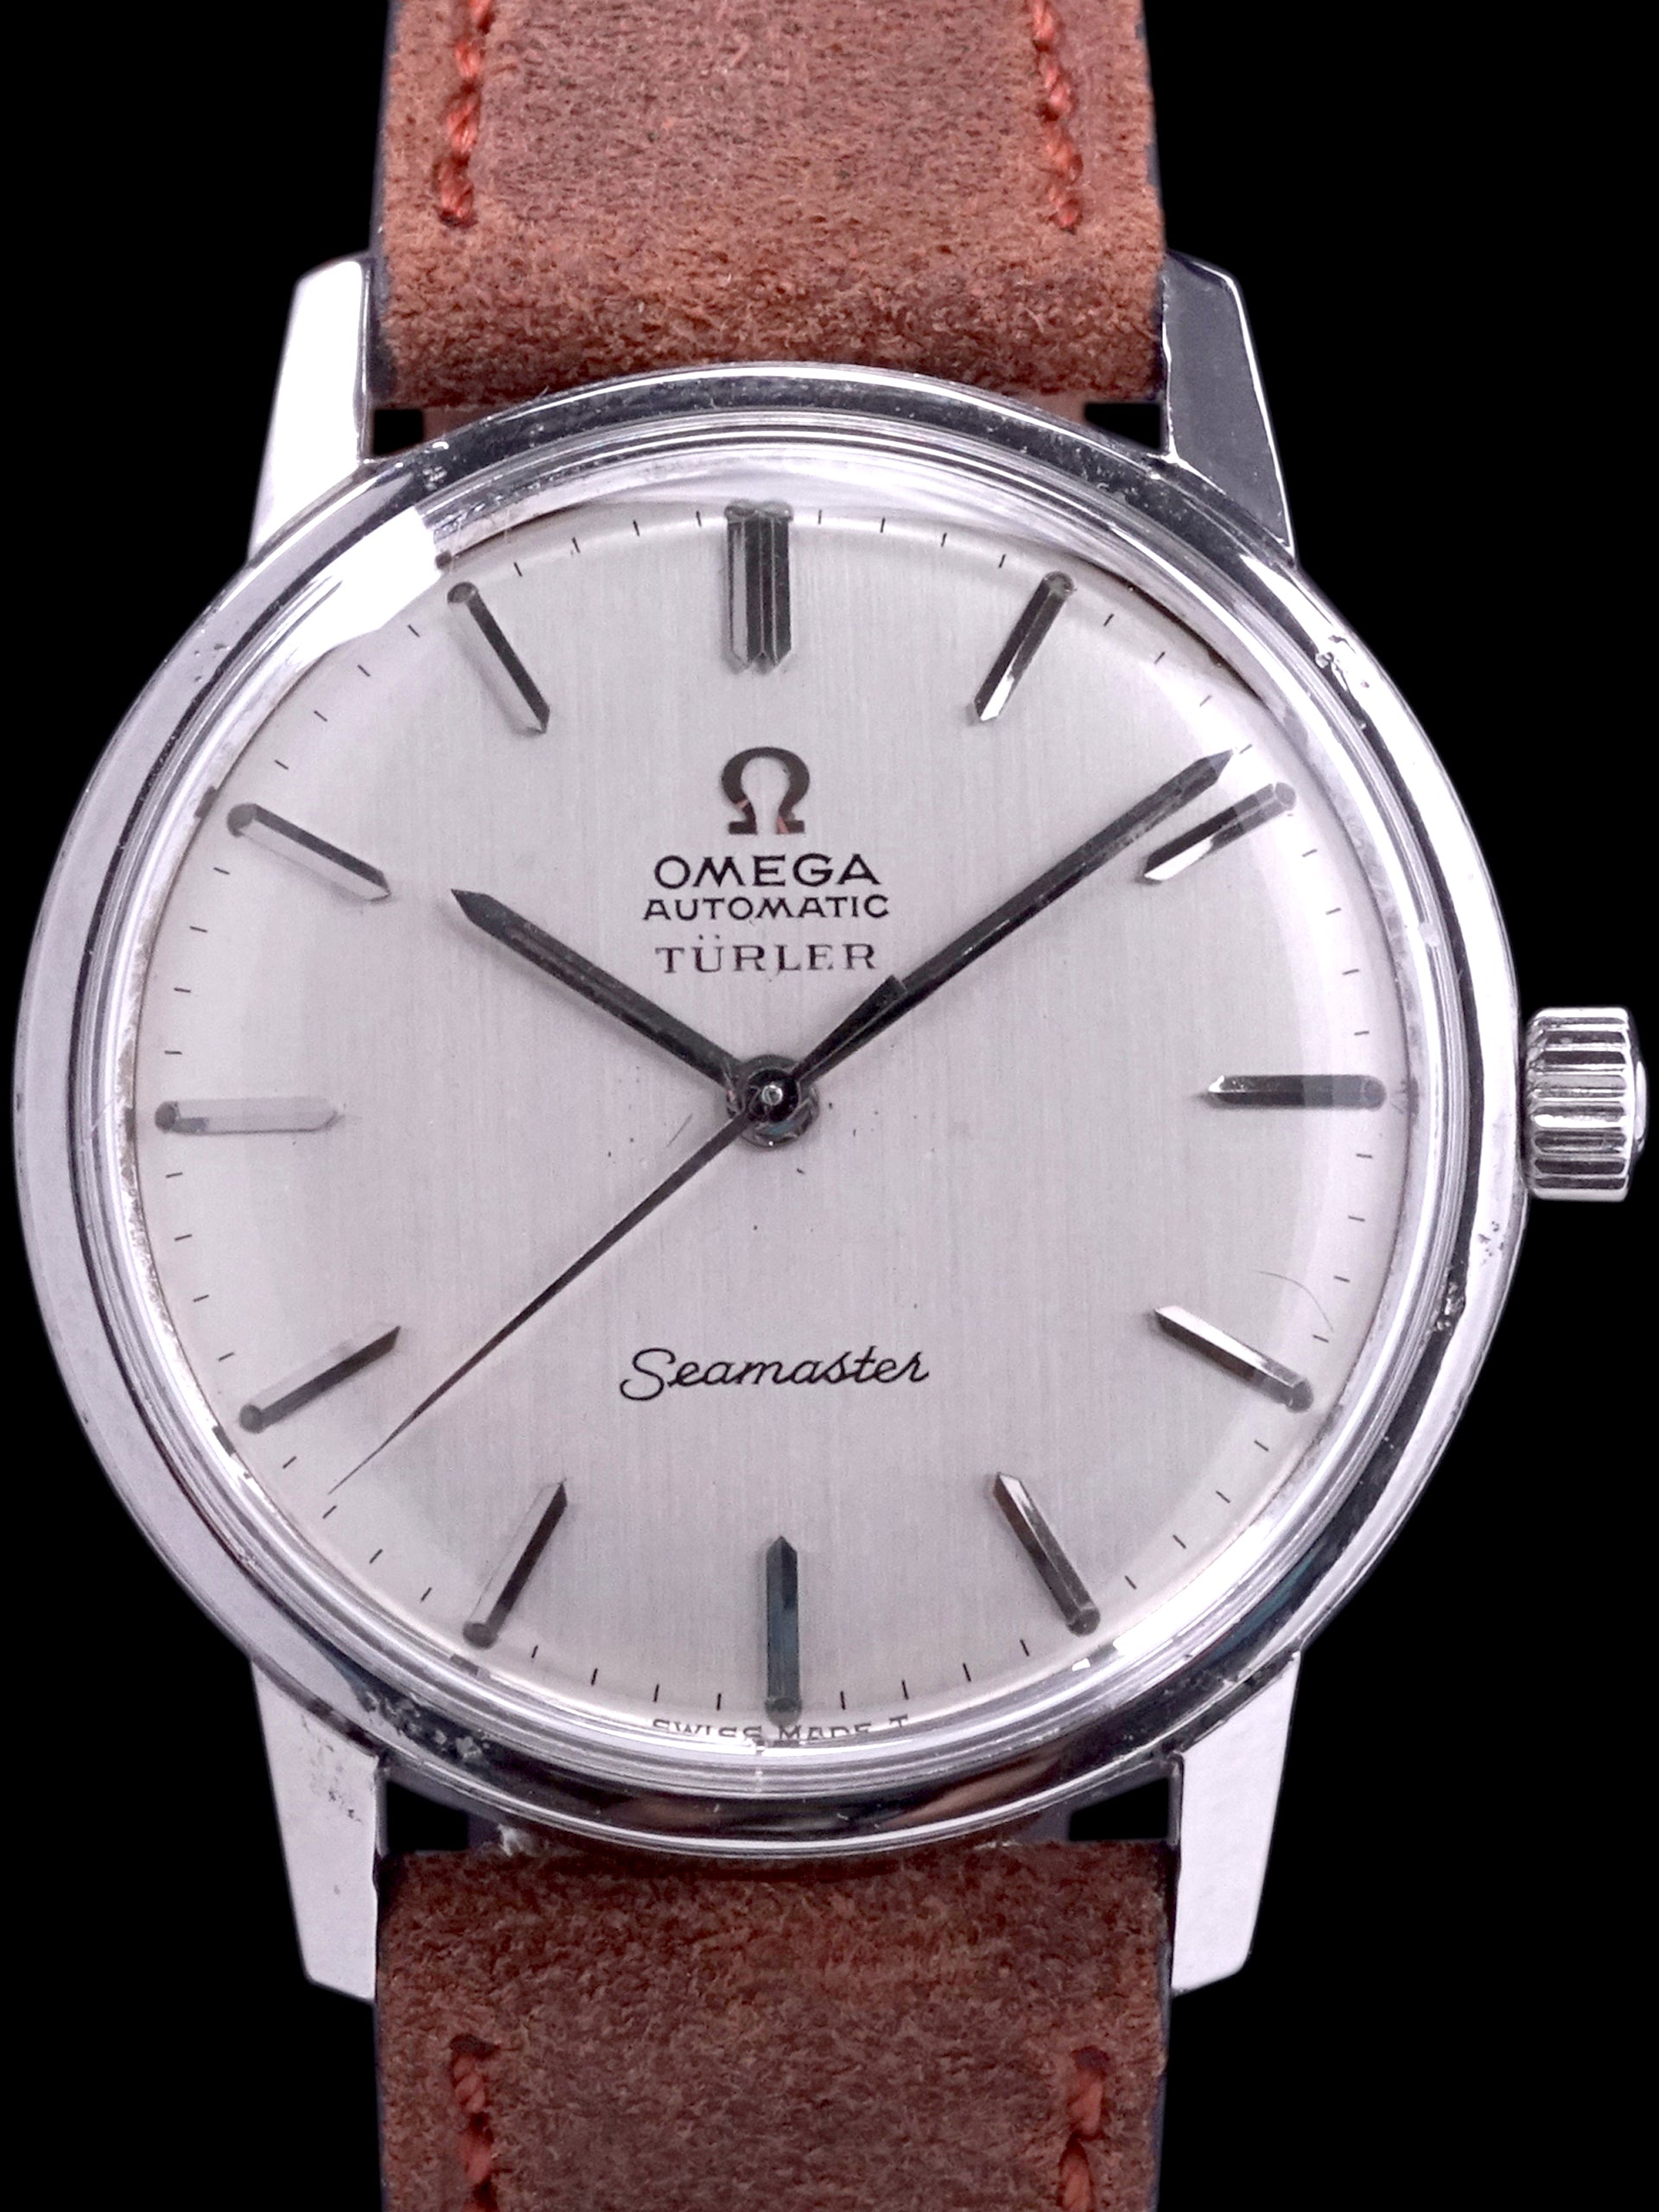 1968 Omega Seamaster Automatic (Ref. 165.037 SP) "Turler Dial"